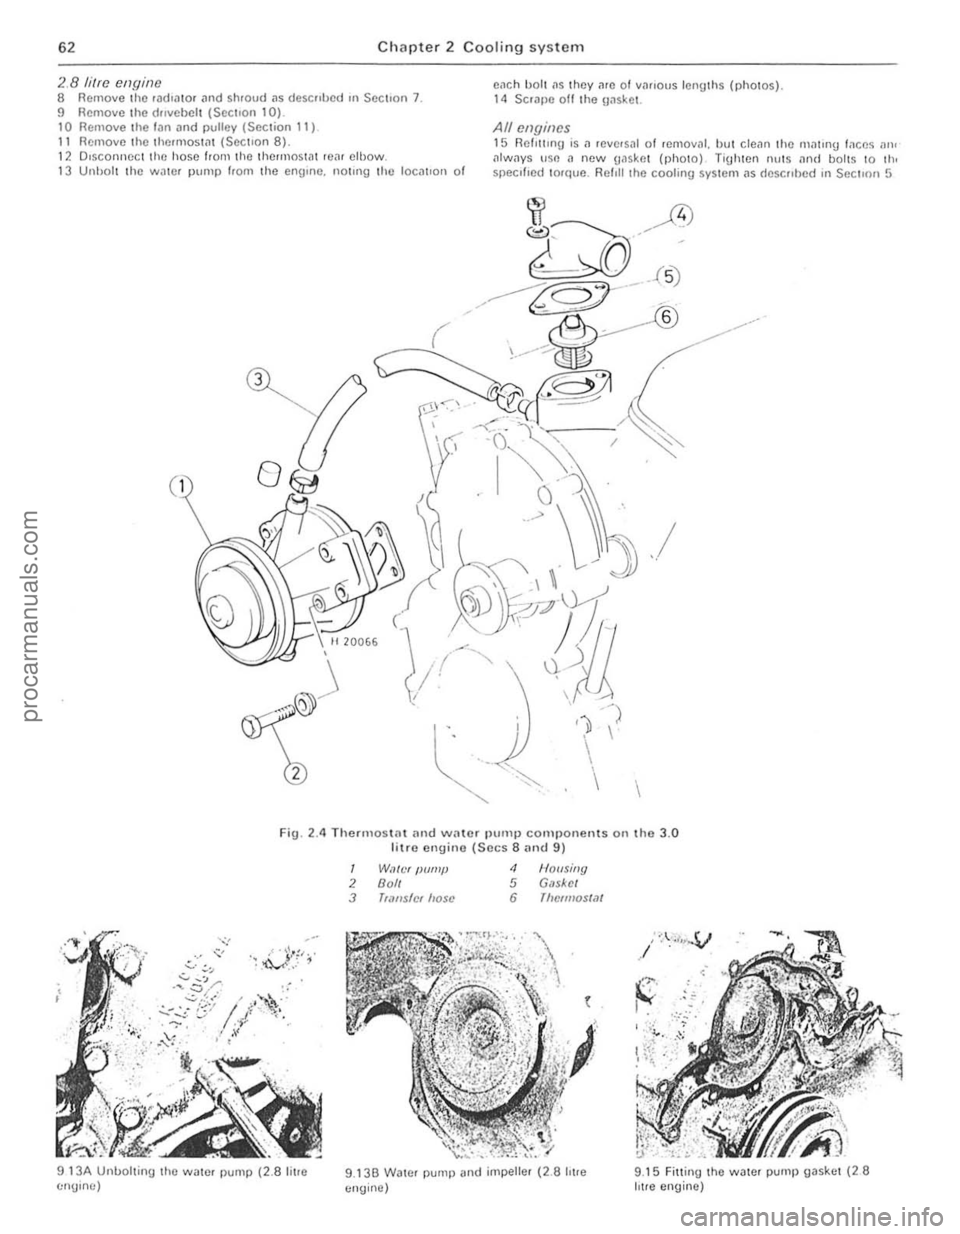 FORD CAPRI 1974  Workshop Manual ) 
62 Chapter 2 Cooling system 
2.8 litre engine 8 Remove the radrator  ,lnd Shroud as descrIbed In SectIon 7. 9 Remove  the dlll/cbell (Section 10). 10 Remove the ftm and pulley (Section 11) 11 Remov